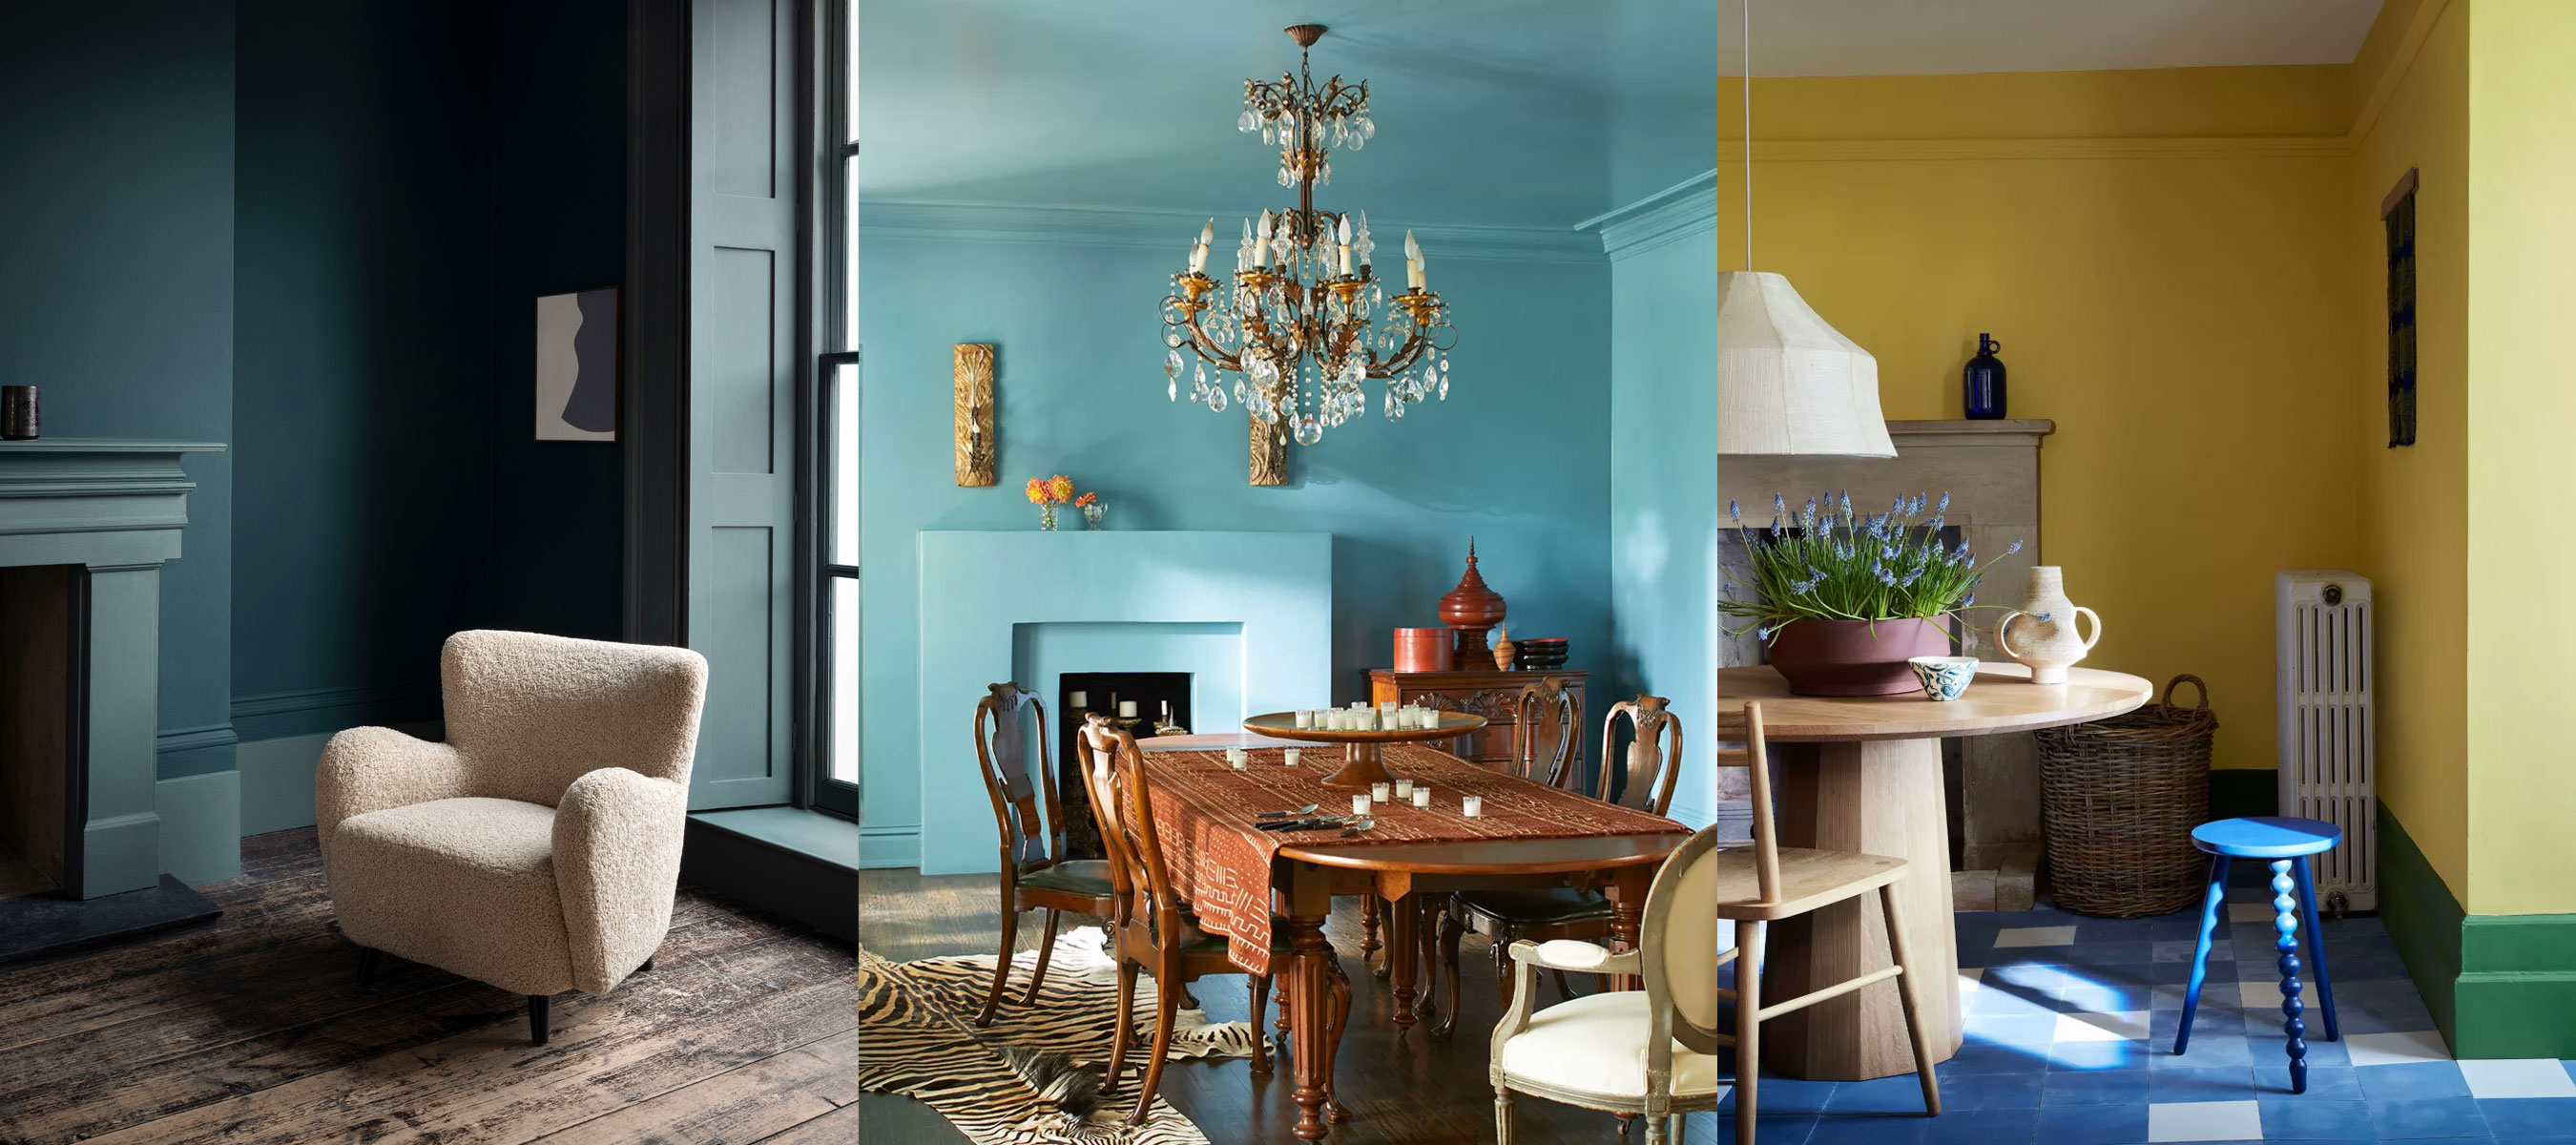 Should Your Trim Match Your Wall Color? 6 Tips To Consider |